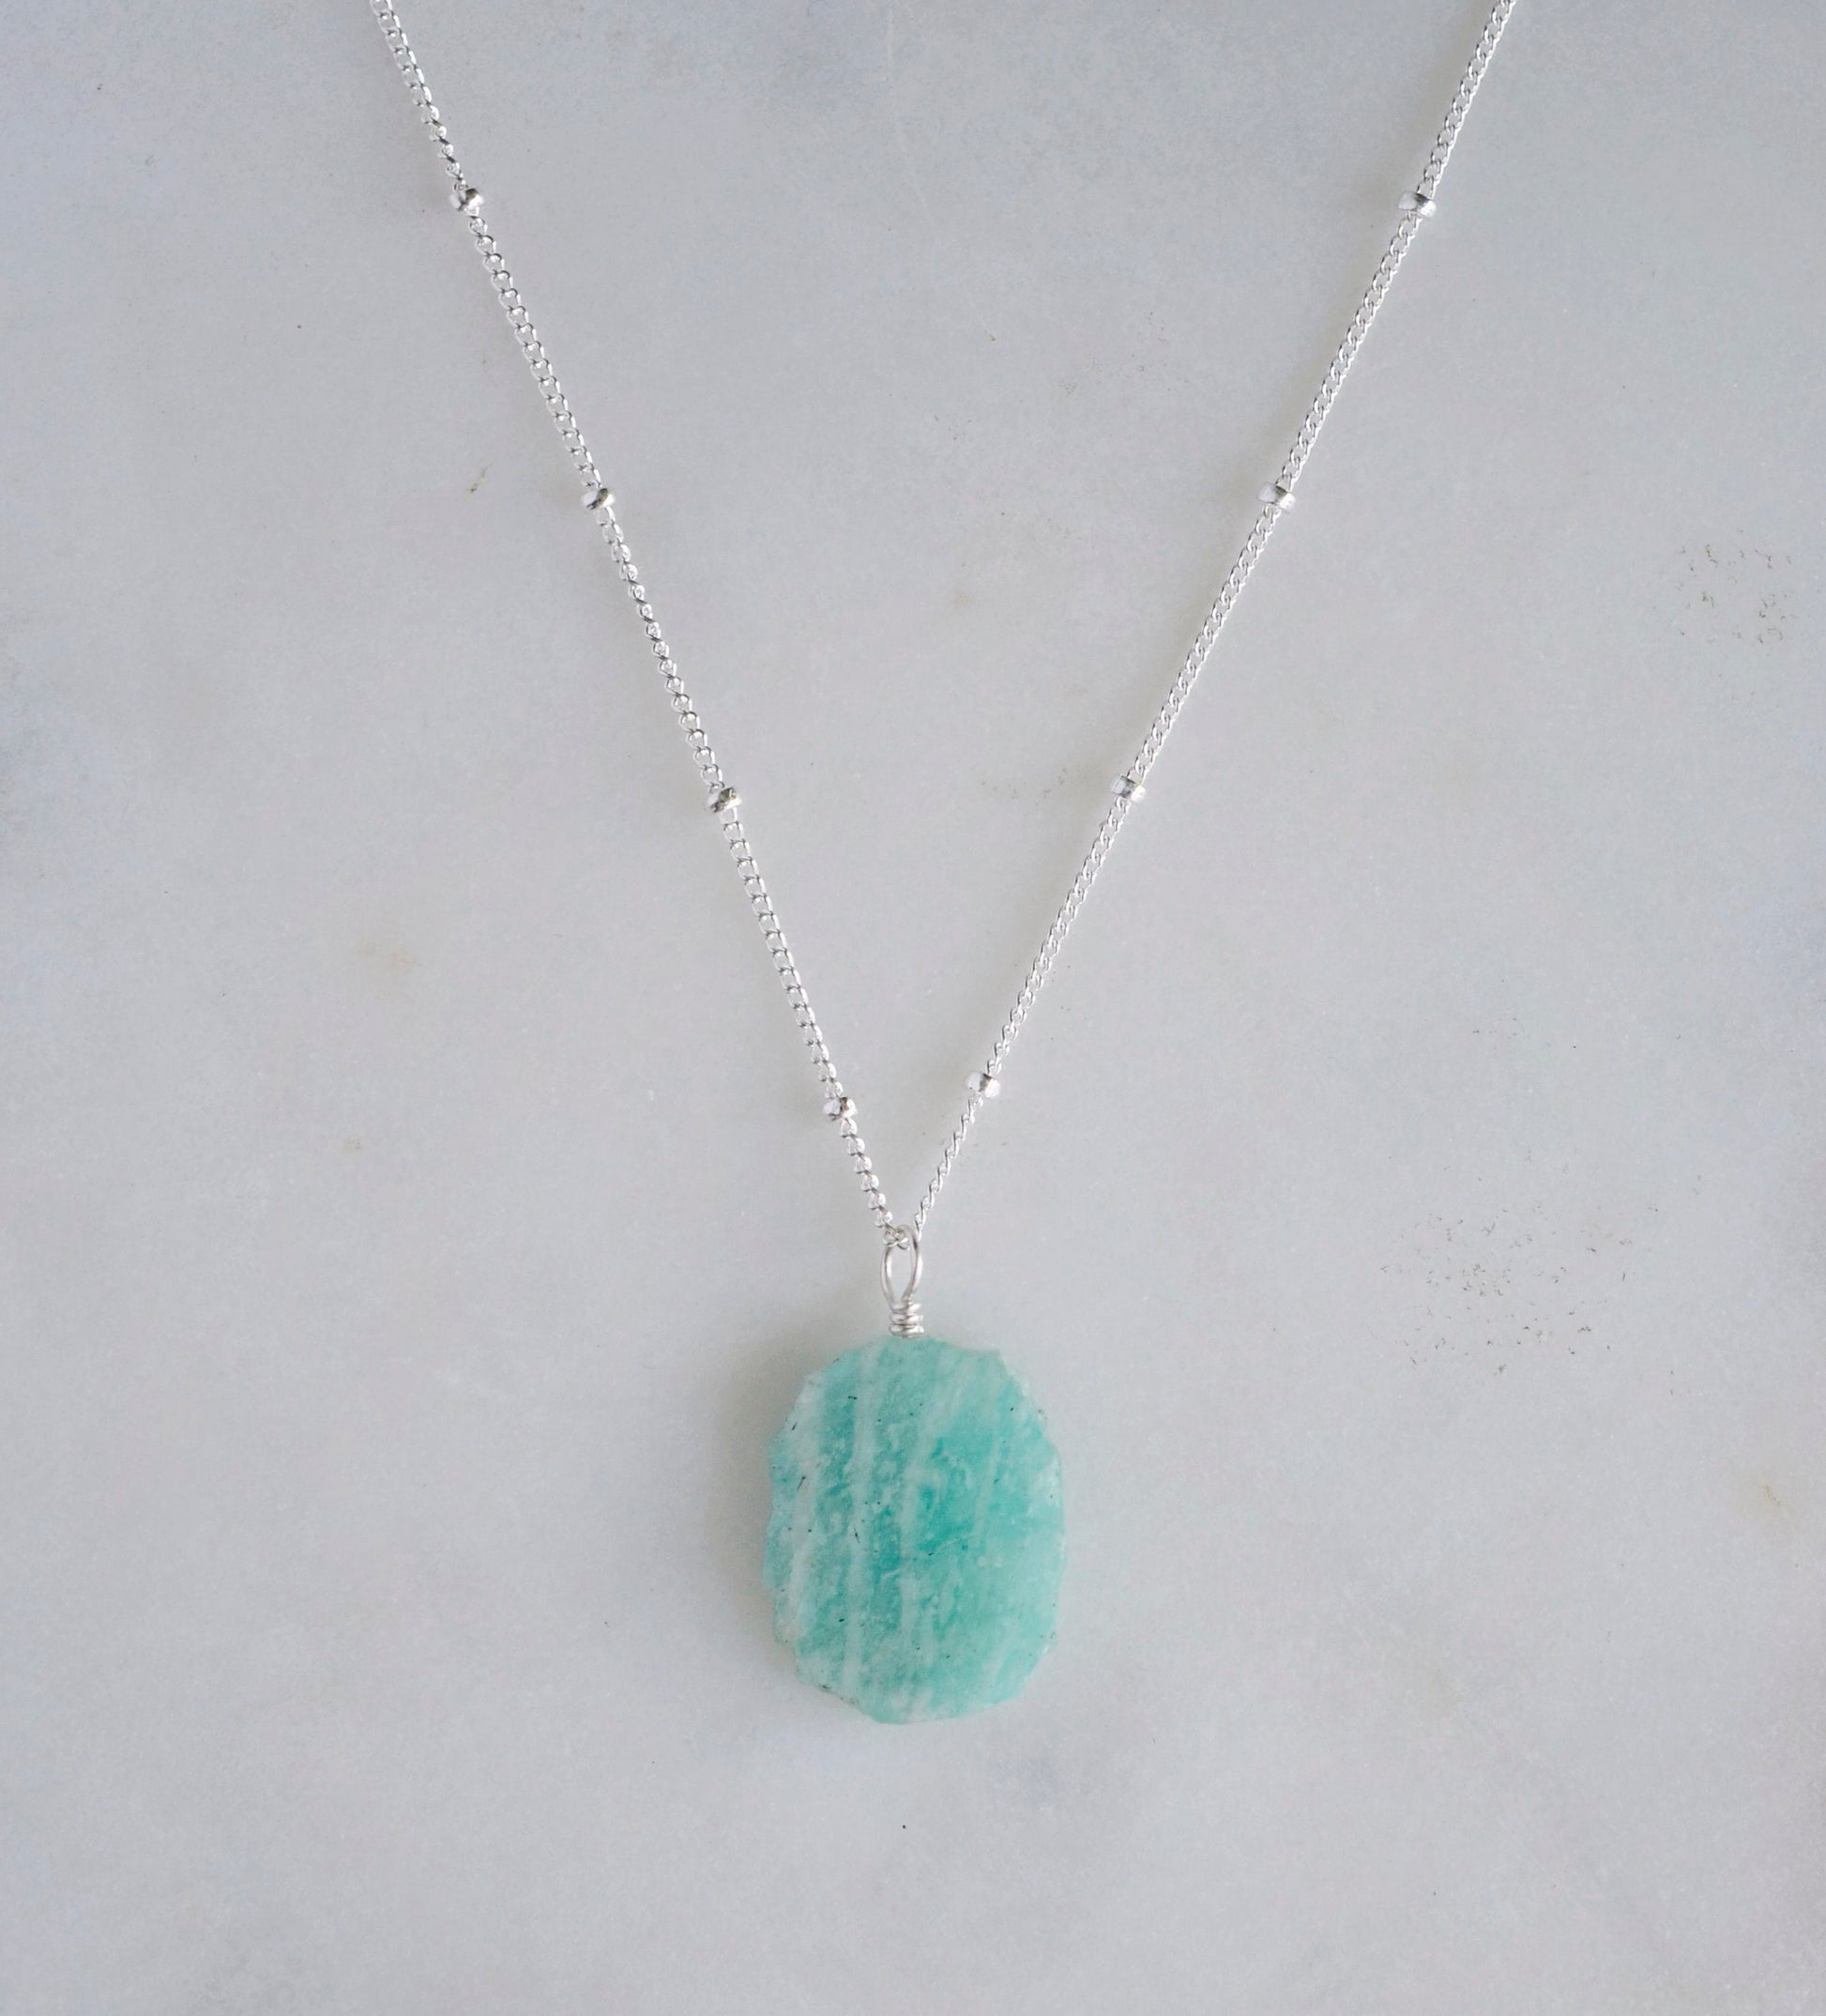 Aqua blue amazonite slice gemstone set onto a sterling silver chain. The stone is semi oval in shape, but irregular. It's smooth polished, but with raw edges. 